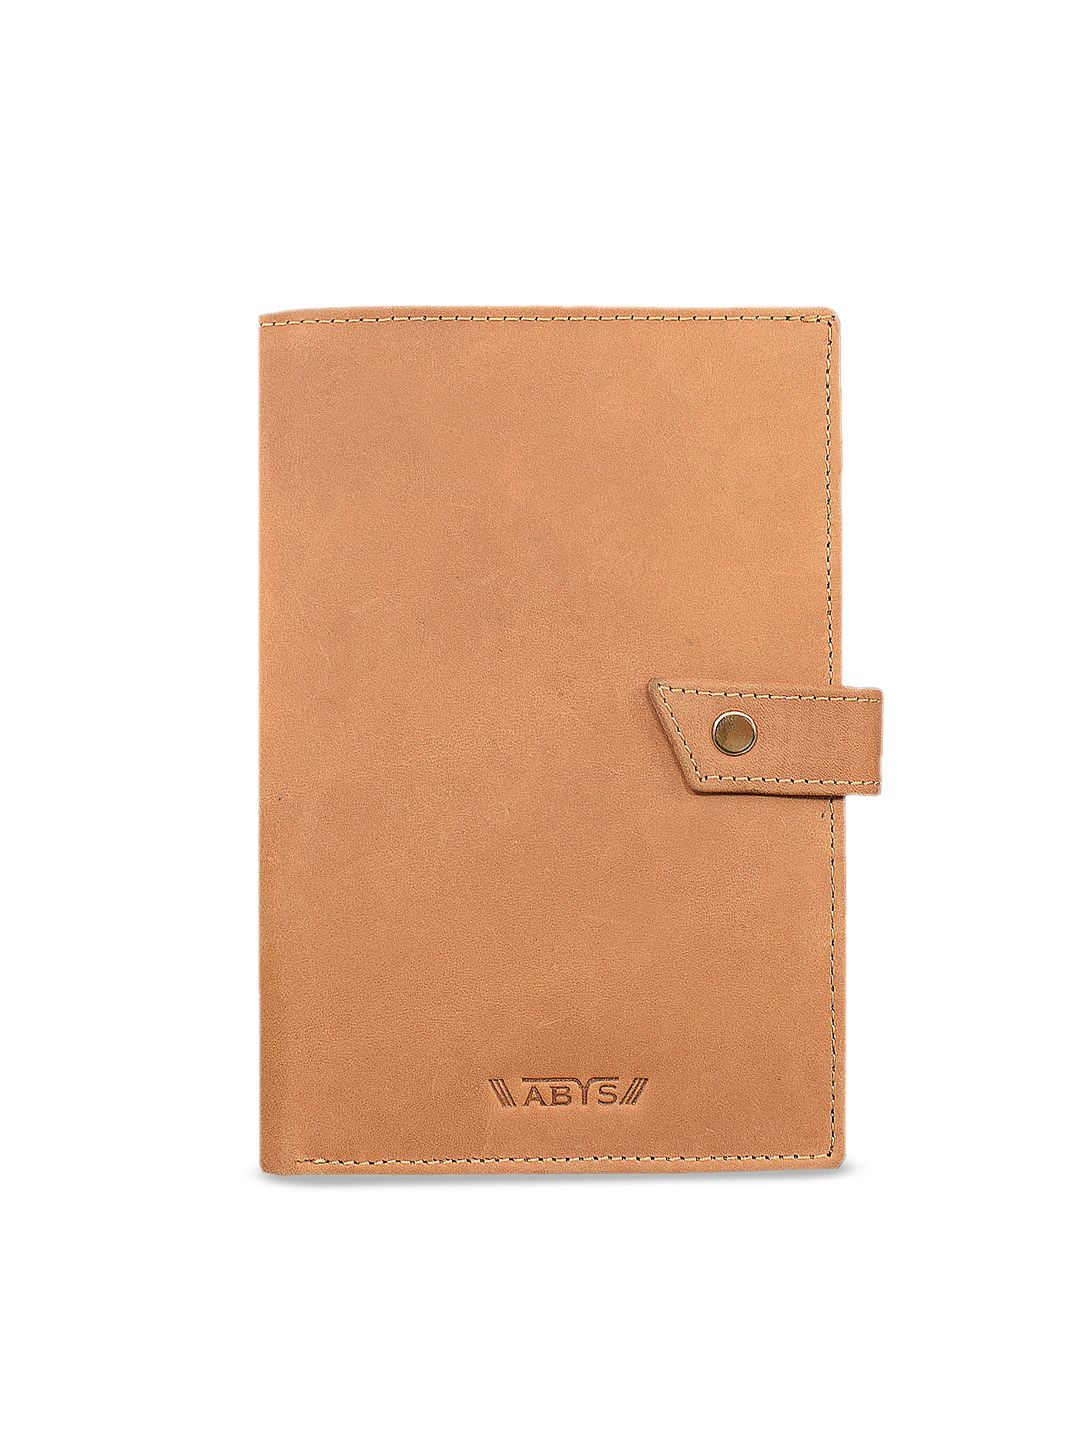 ABYS Unisex Tan Brown Solid Leather Passport Holder Price in India